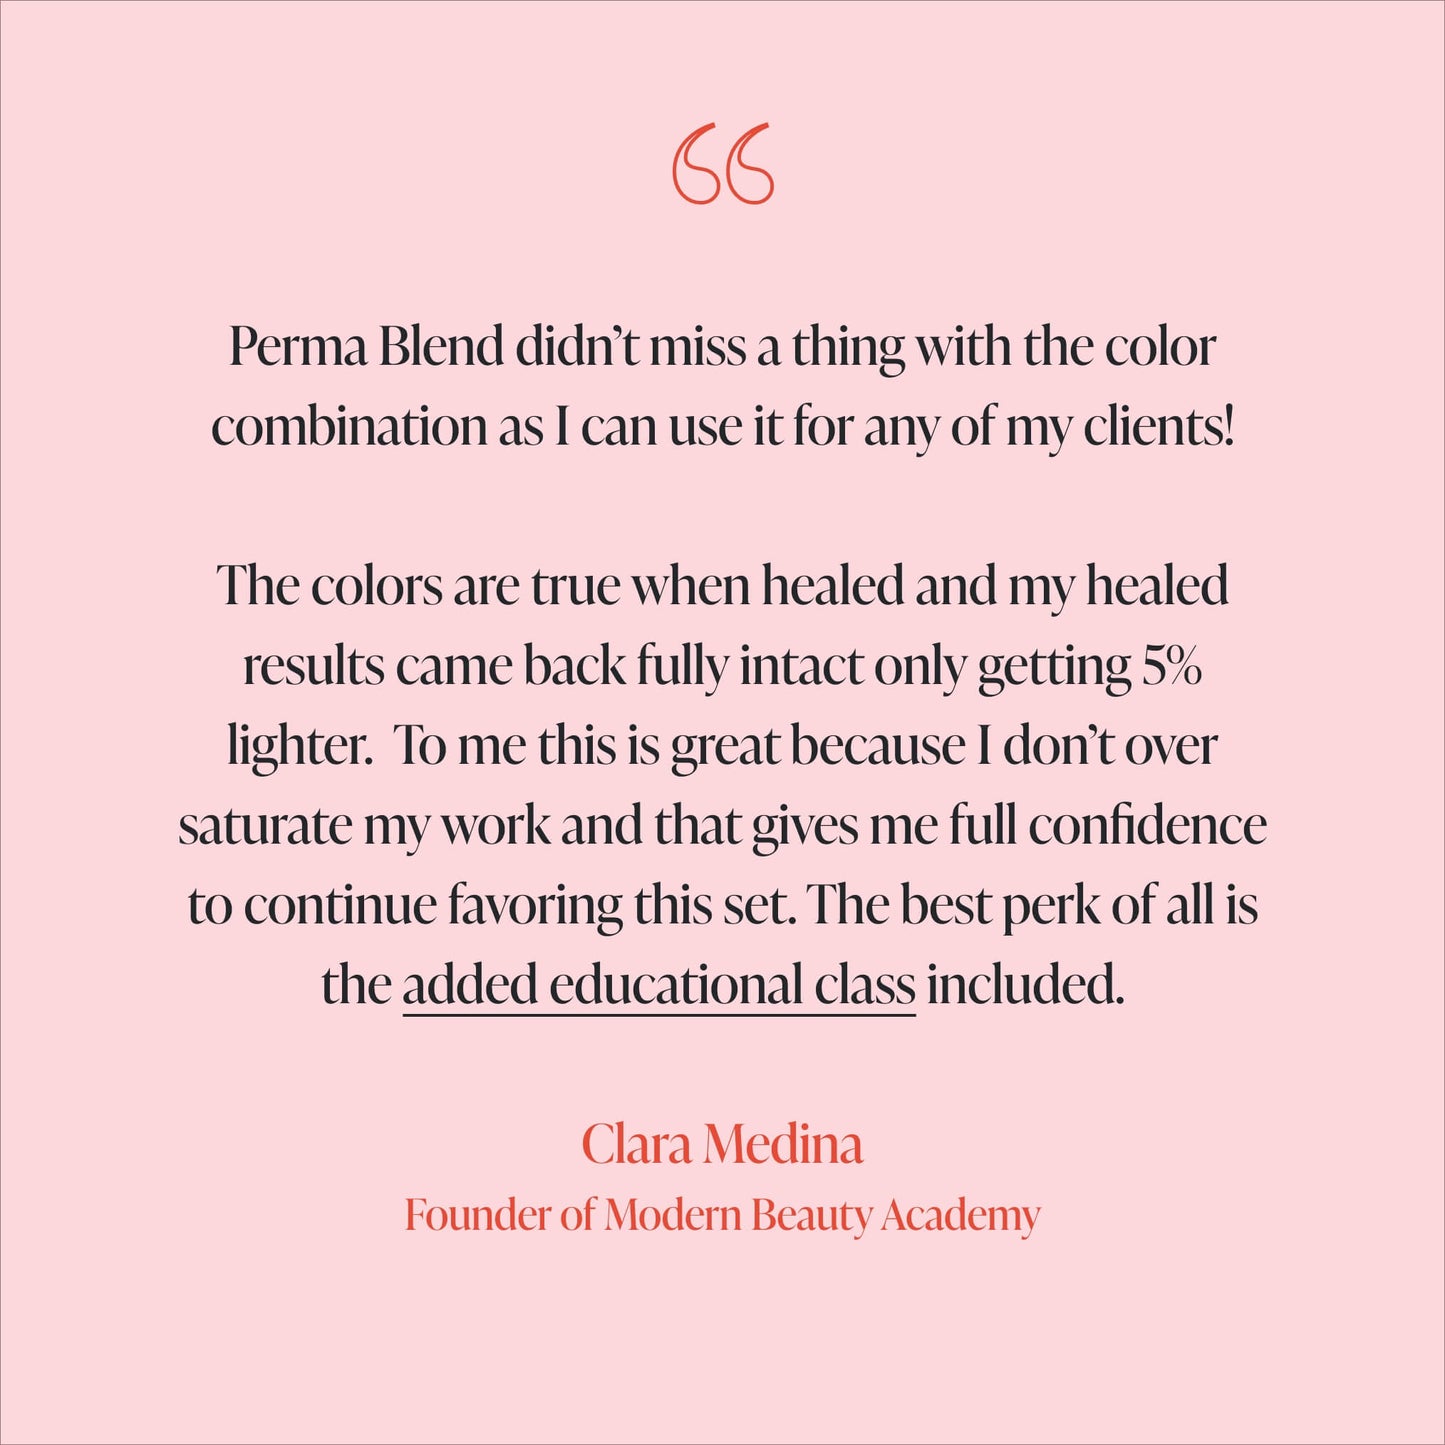 Clara Medina Testimonial - Perma Blend didn’t miss a thing with the color combination as I can use it for any of my clients!  The colors are true when healed and my healed results came back fully intact only getting 5% lighter.  To me this is great because I don’t over saturate my work and that gives me full confidence to continue favoring this set. The best perk of all is the added educational class included.